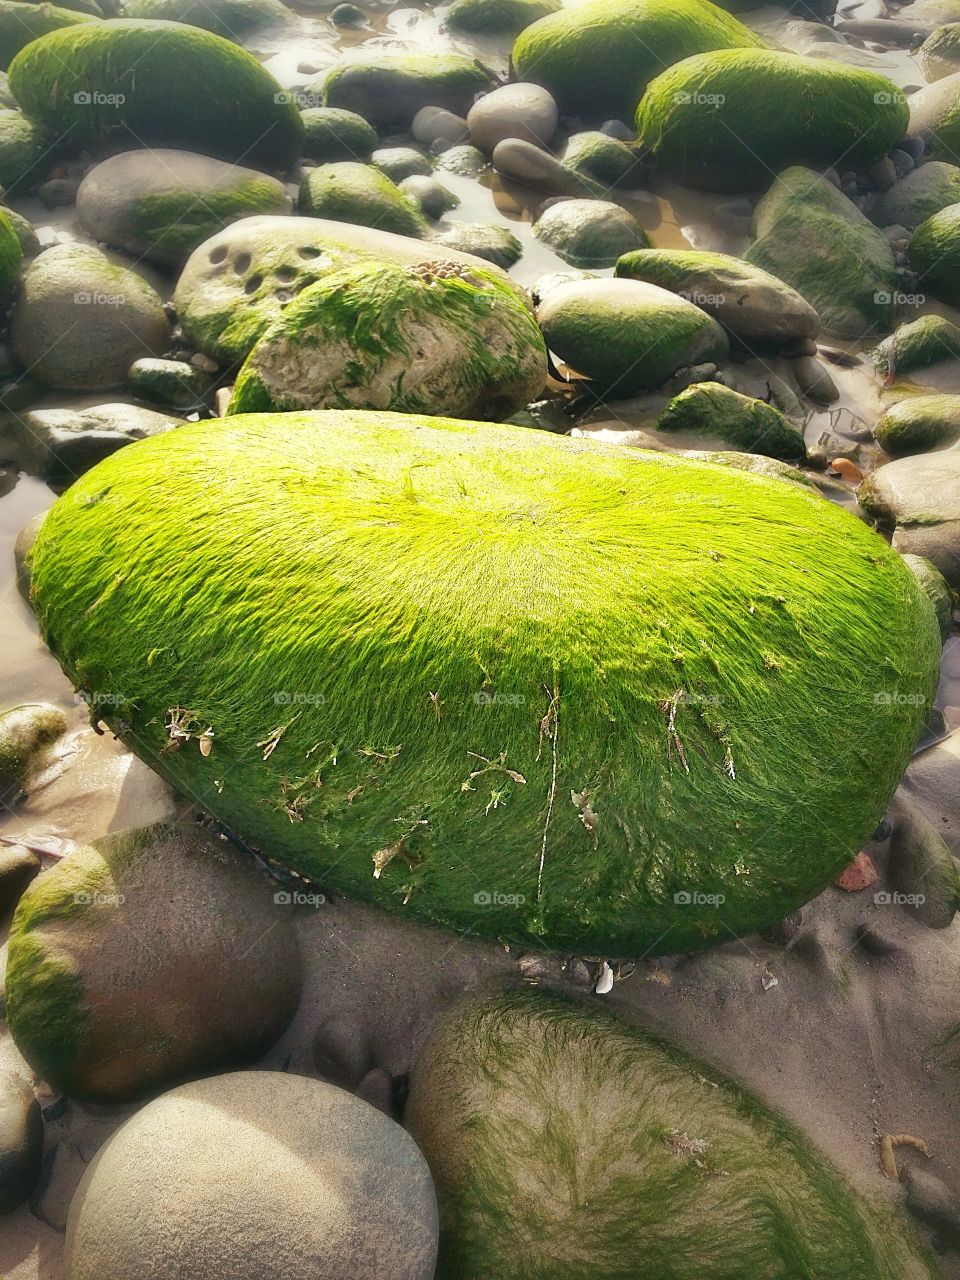 Ocean Green. Love all the wonderful things you can find on the beach